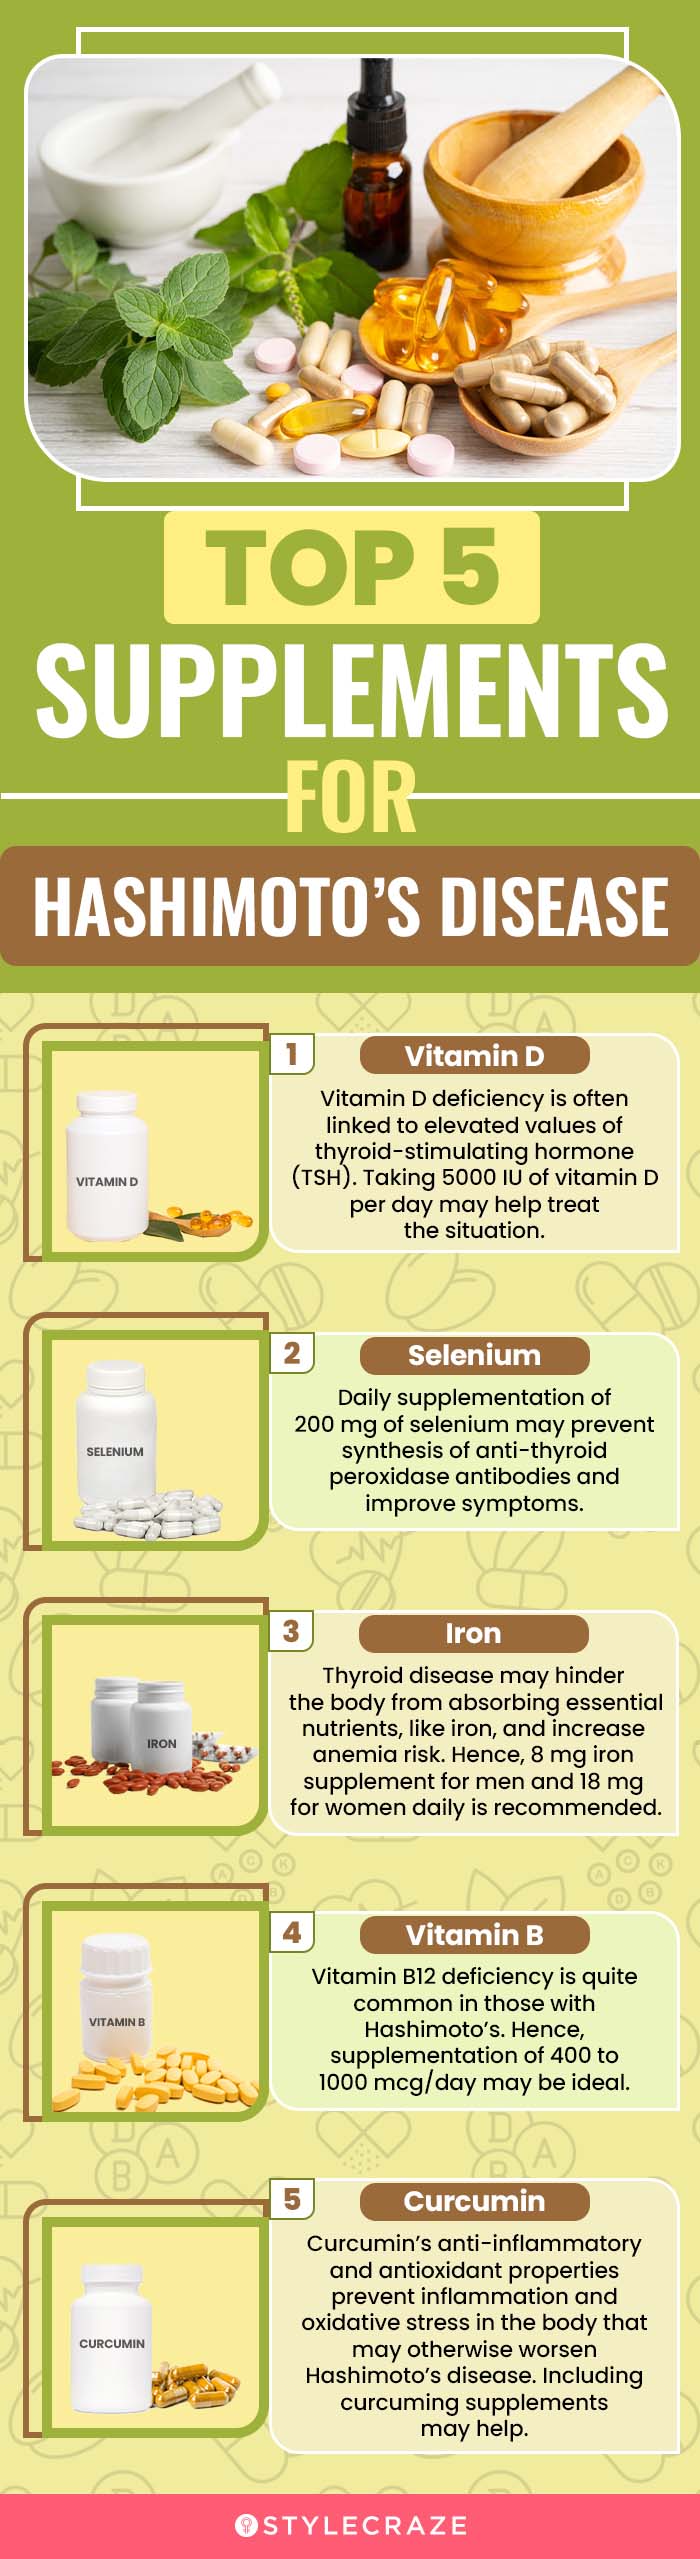 top 5 supplements for hashimoto's disease (infographic)